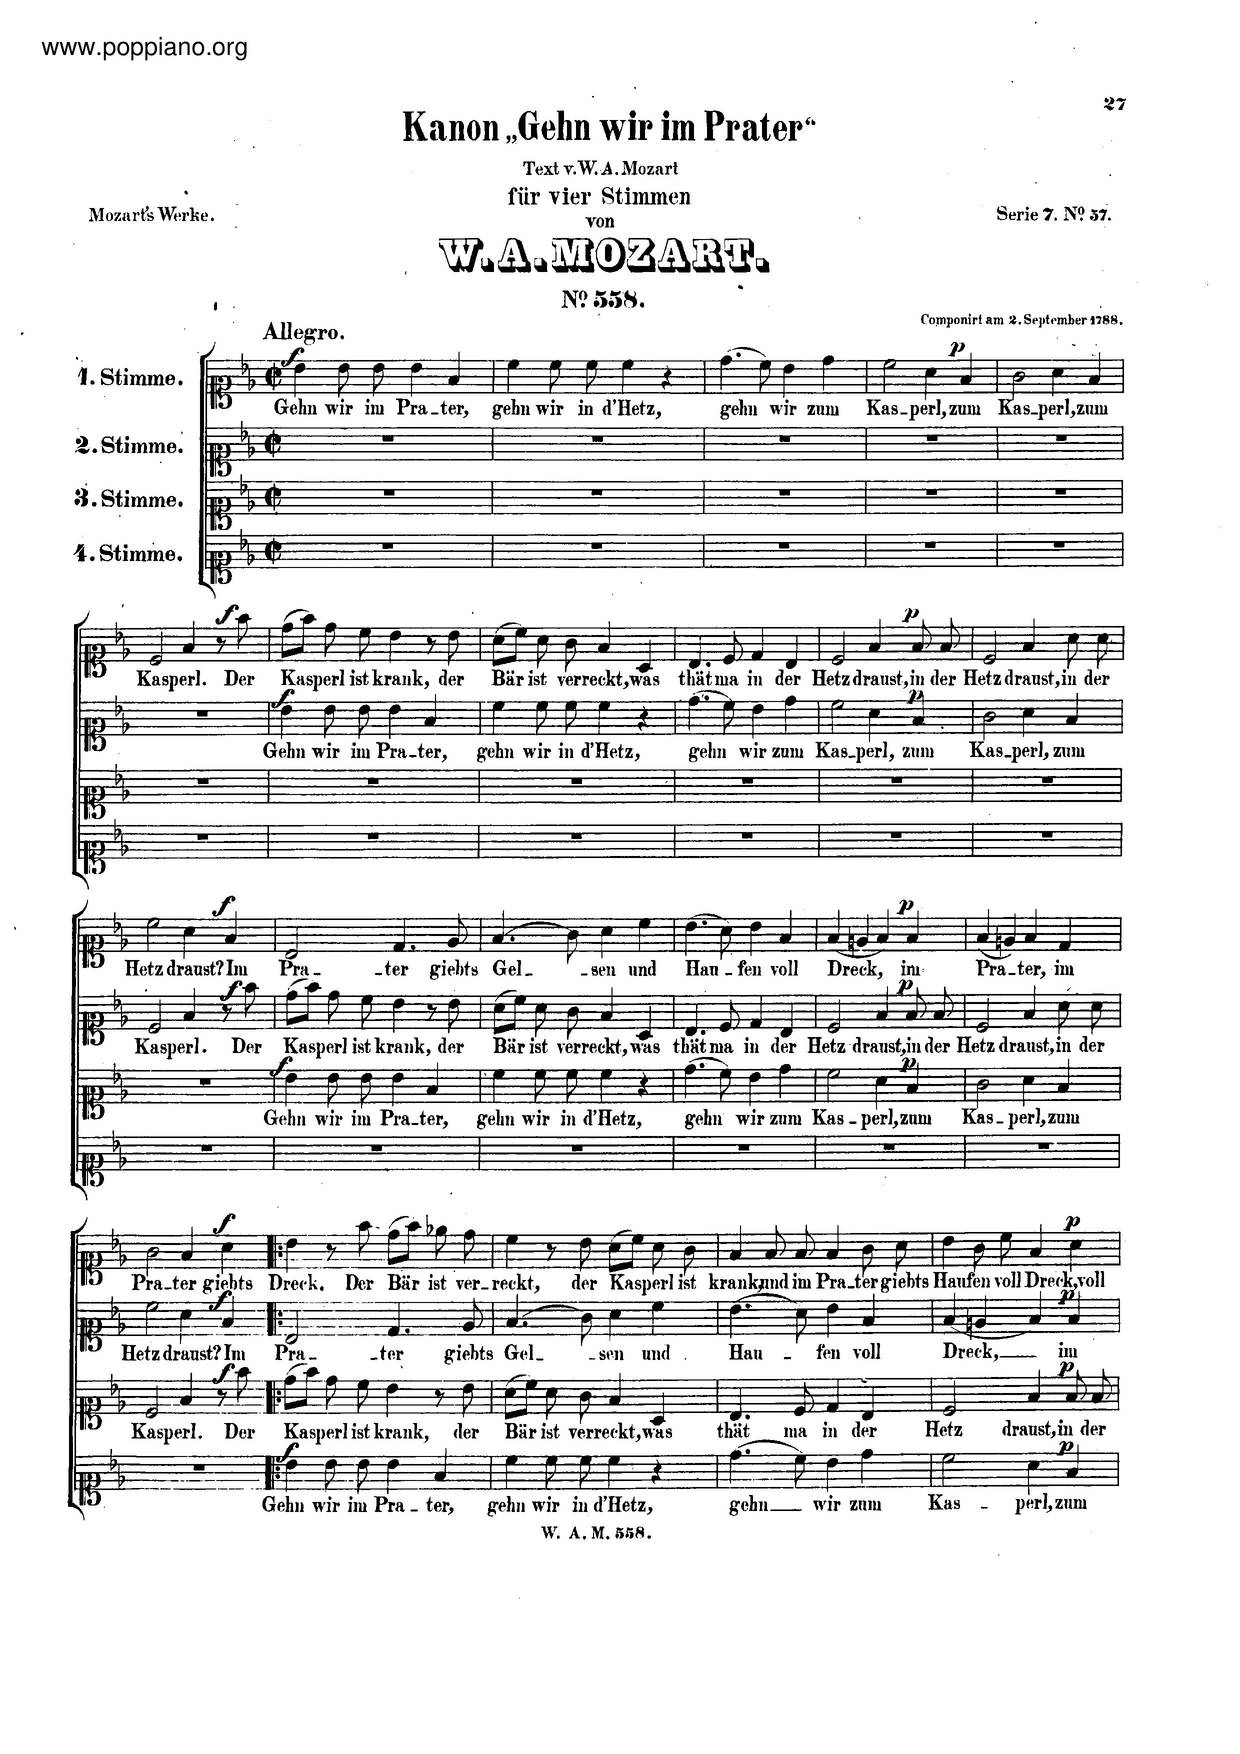 Canon For 4 Voices In B-Flat Major, K. 558琴谱